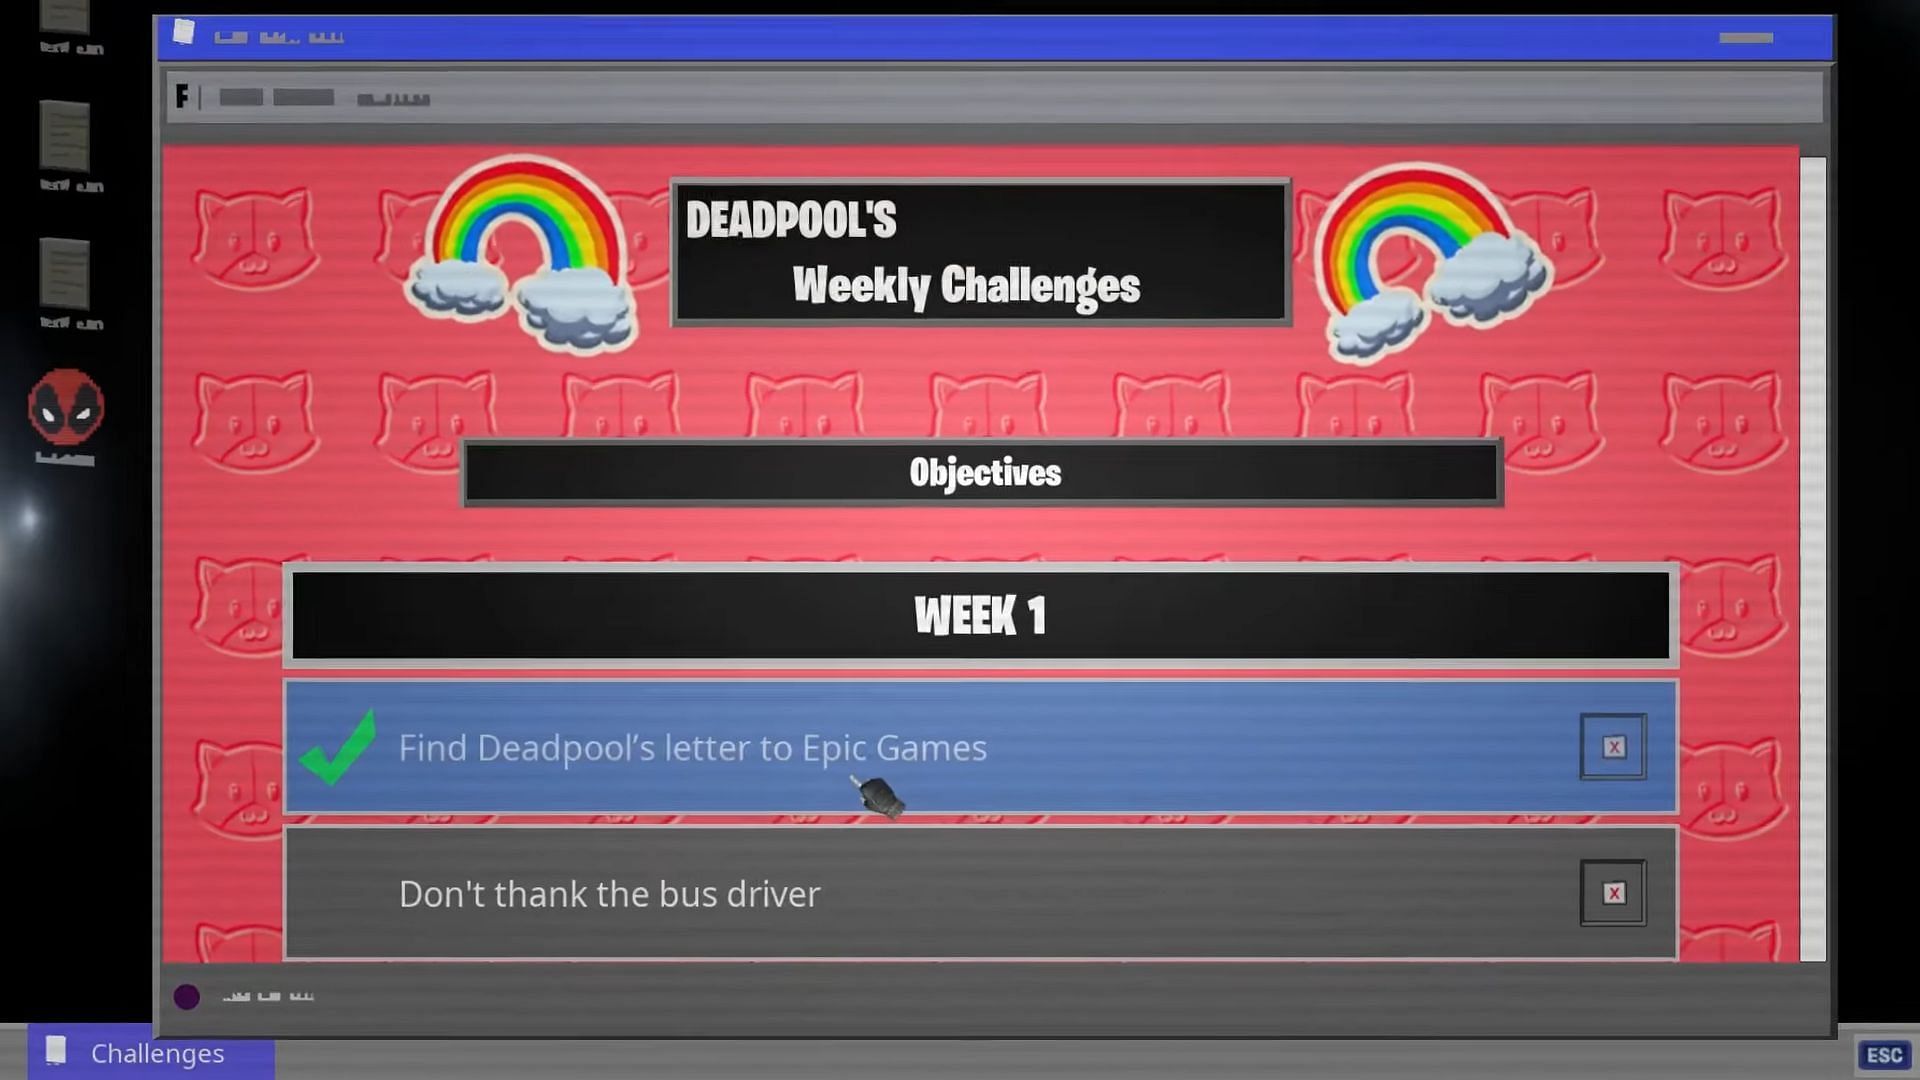 Fortnite players were asked not to thank the bus driver (Image via Epic Games)